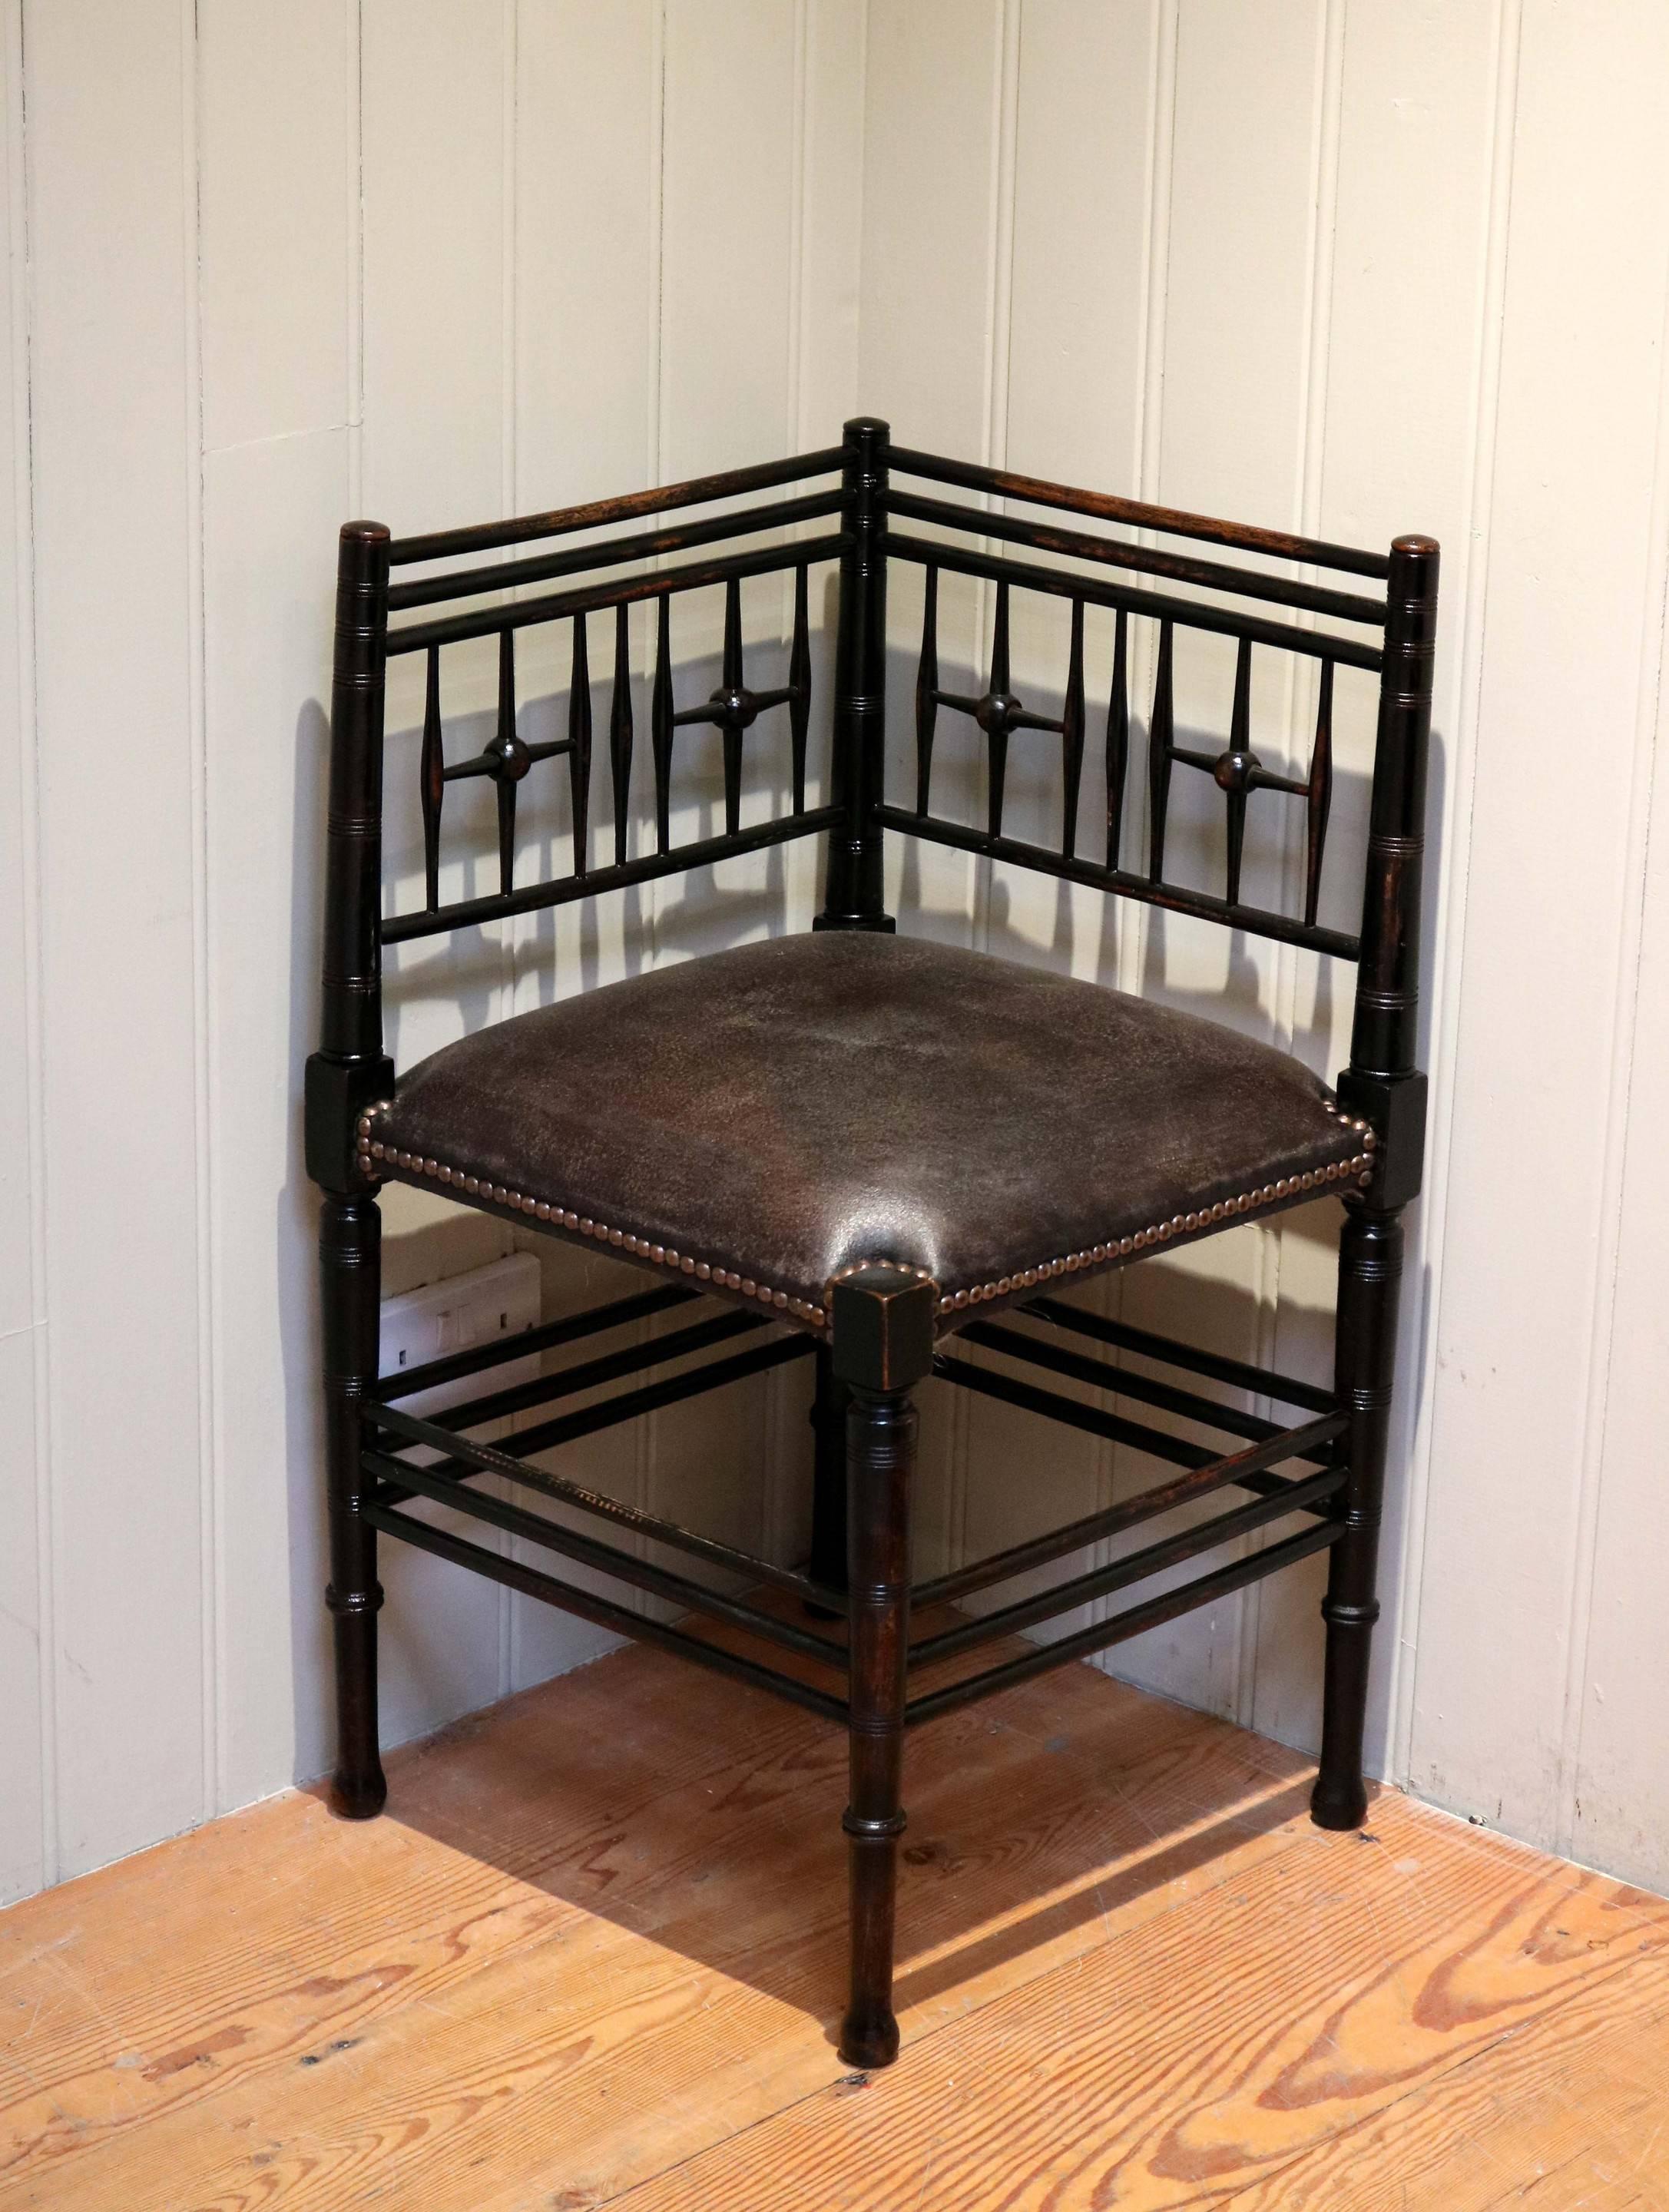 Ebonized corner chair having a upholstered leather seat. This chair was retailed by Liberty & co as part of the Argyll suite designed by Ford Maddox Brown.